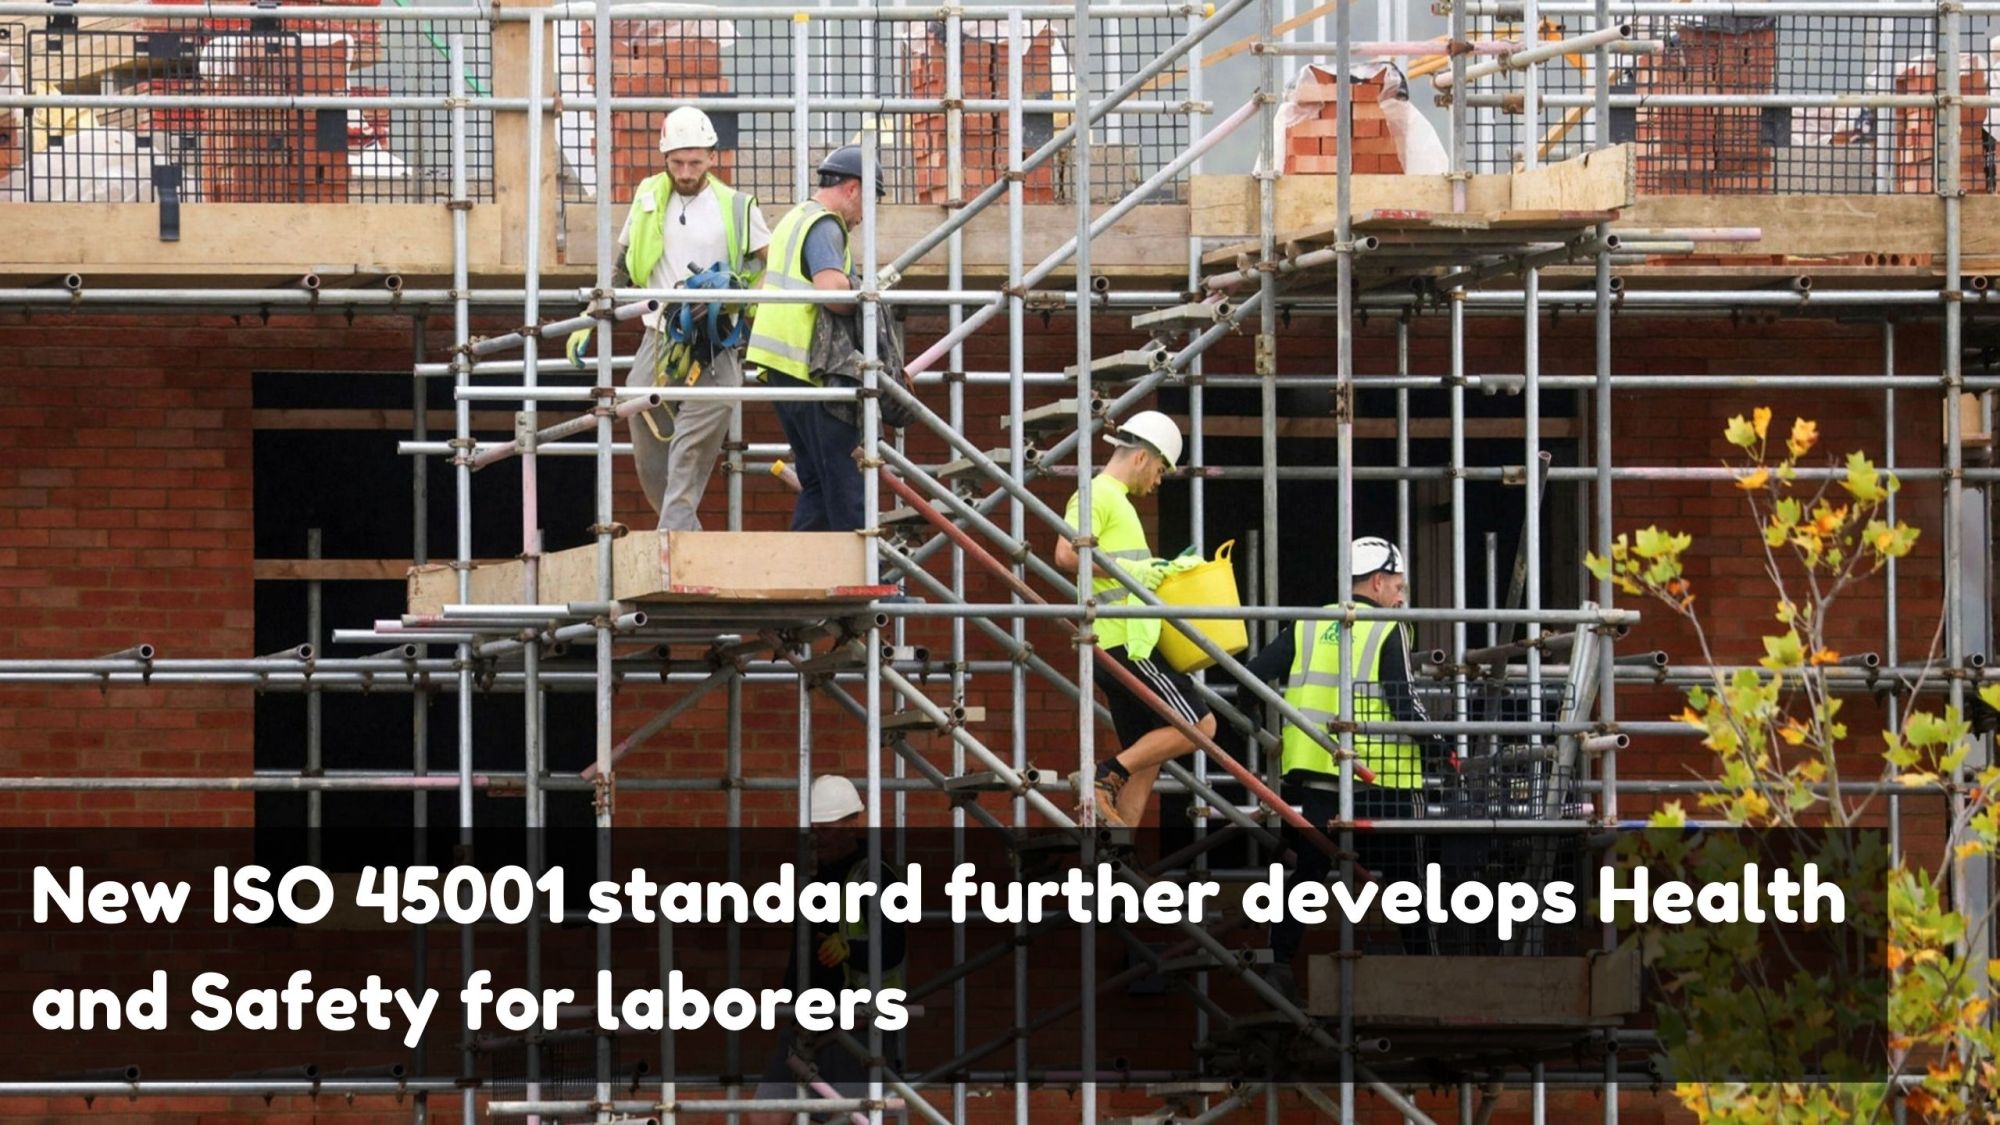 New ISO 45001 standard further develops Health and Safety for laborers